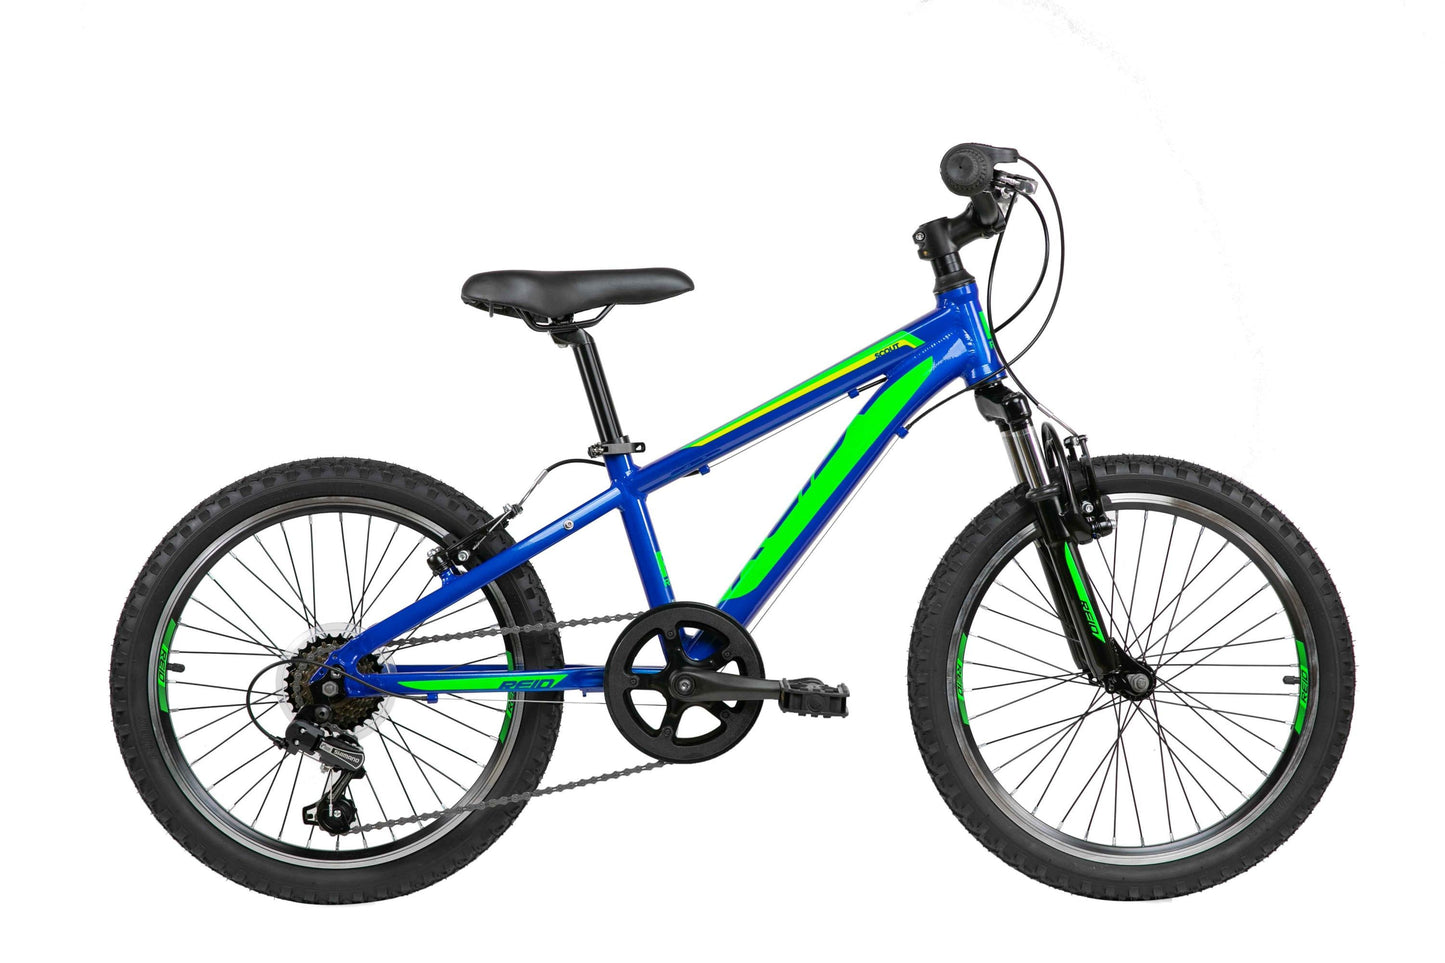 Scout 20" Kids Bike in Blue Green with Shimano 7-speed gearing from Reid Cycles Australia 